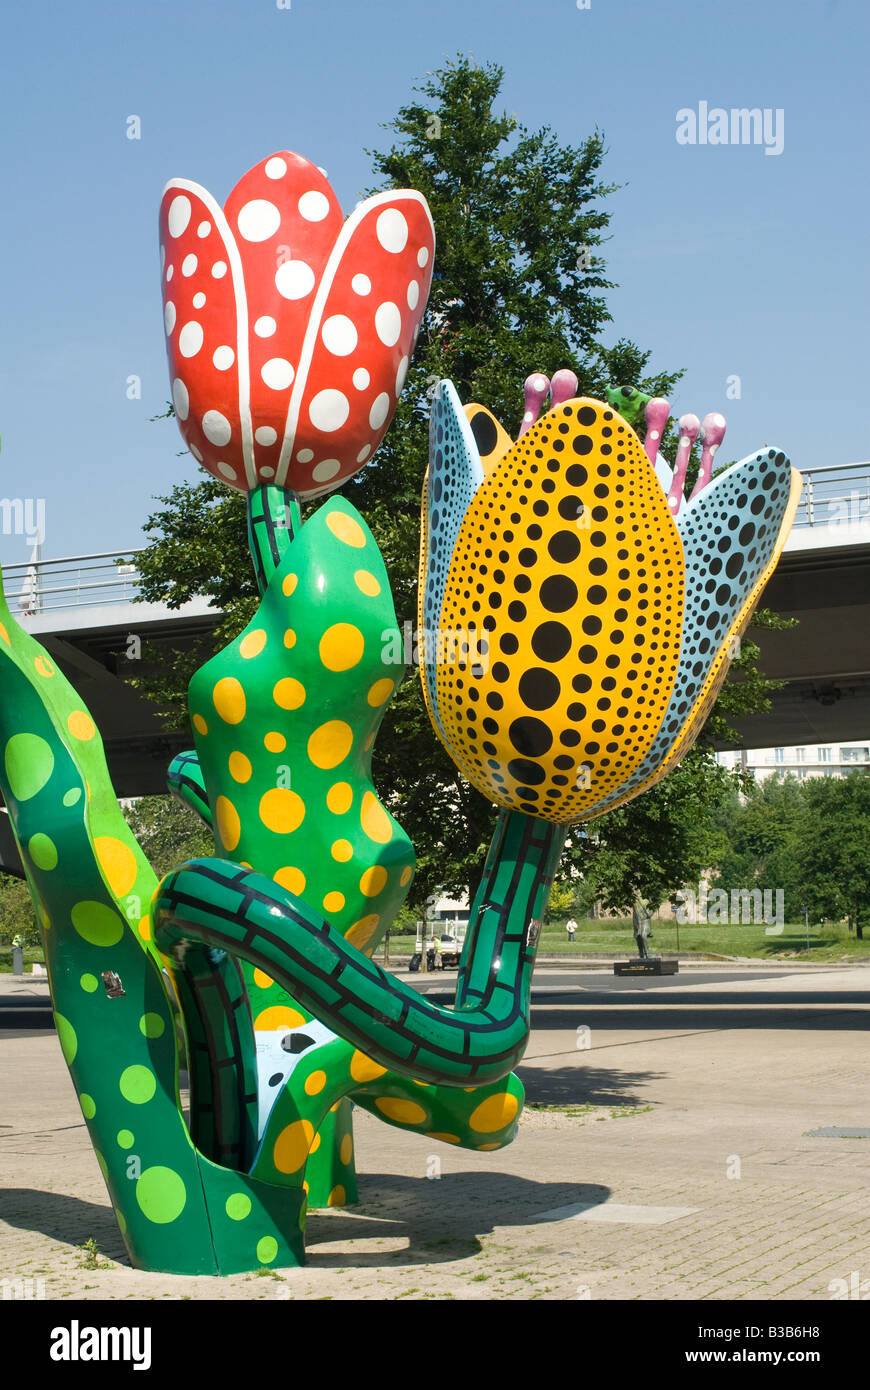 Shangri-la tulips sculpture by Japanese artist Yayoi Kusama in the french  town of Lille, France Stock Photo - Alamy